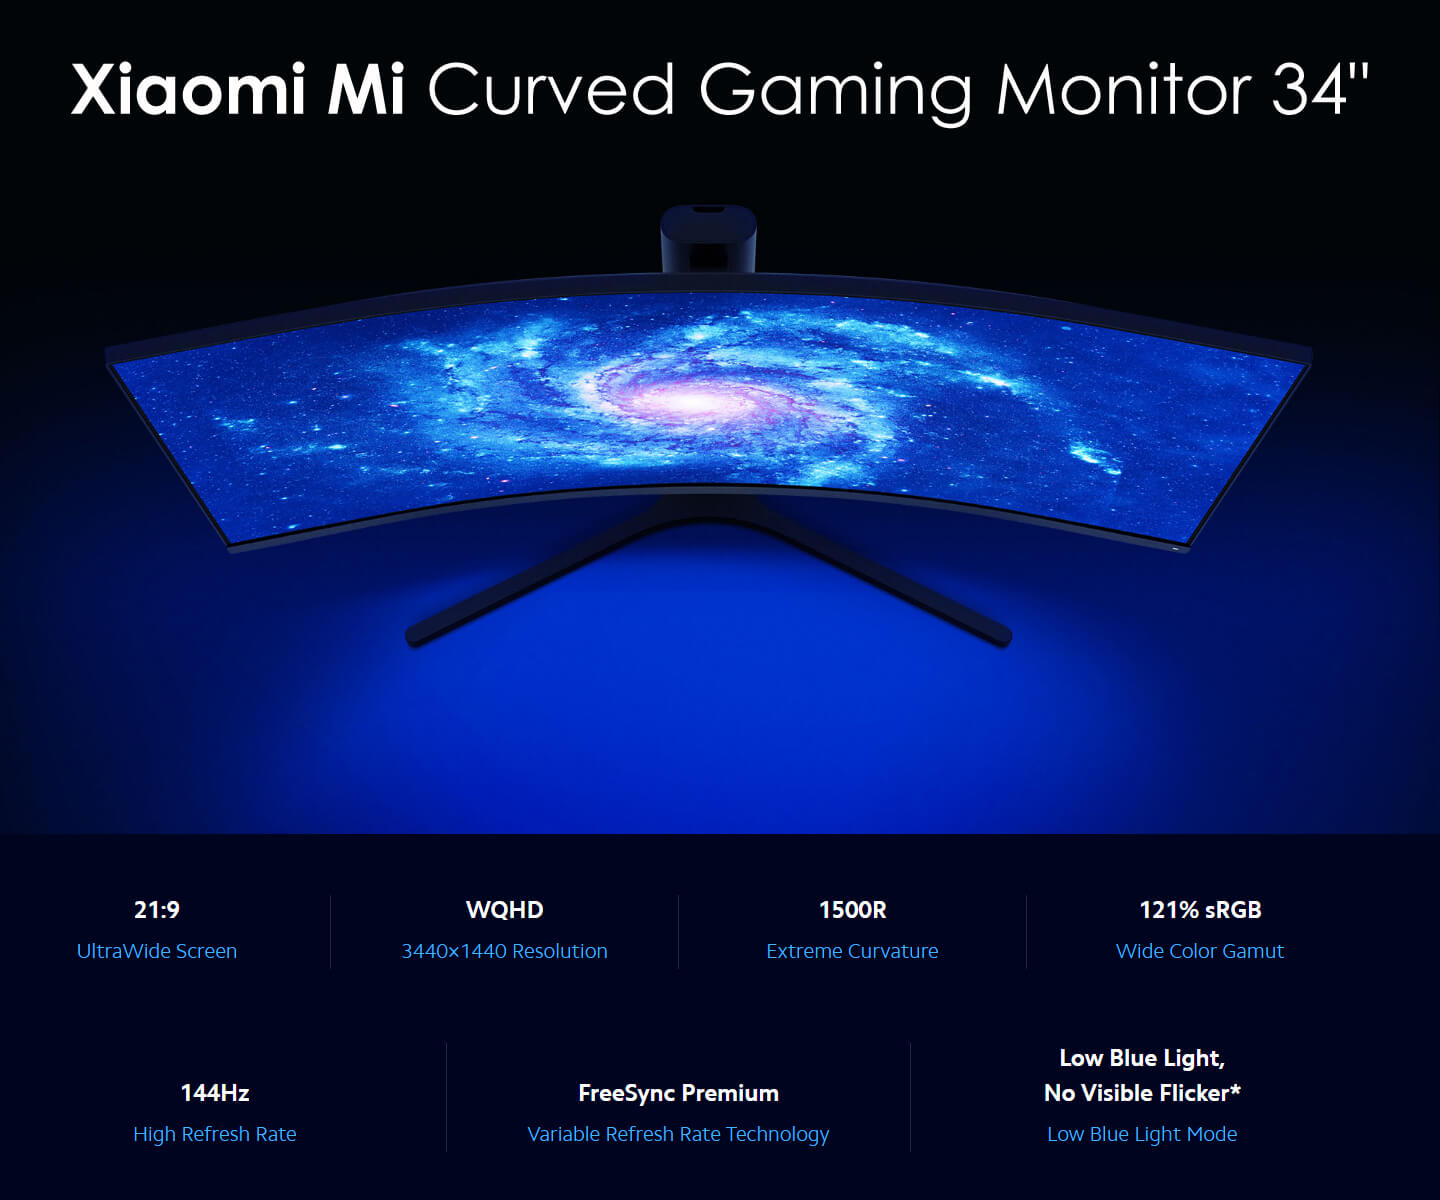 MI Curved Gaming monitor 34